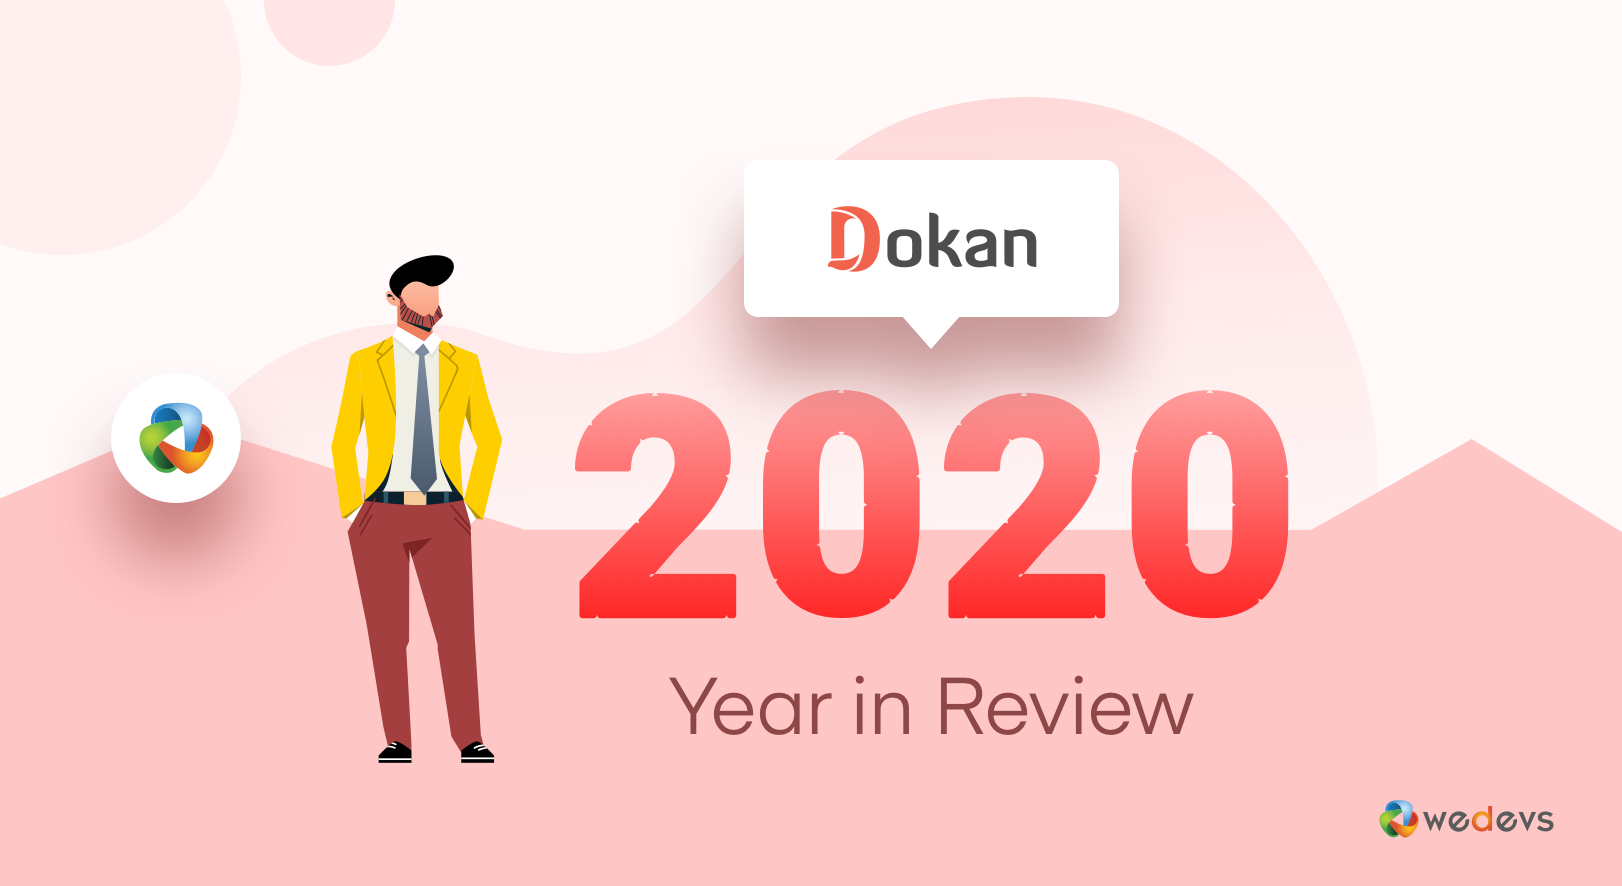 Dokan Year in Review 2020: A Year of Empowering People throughout The Pandemic